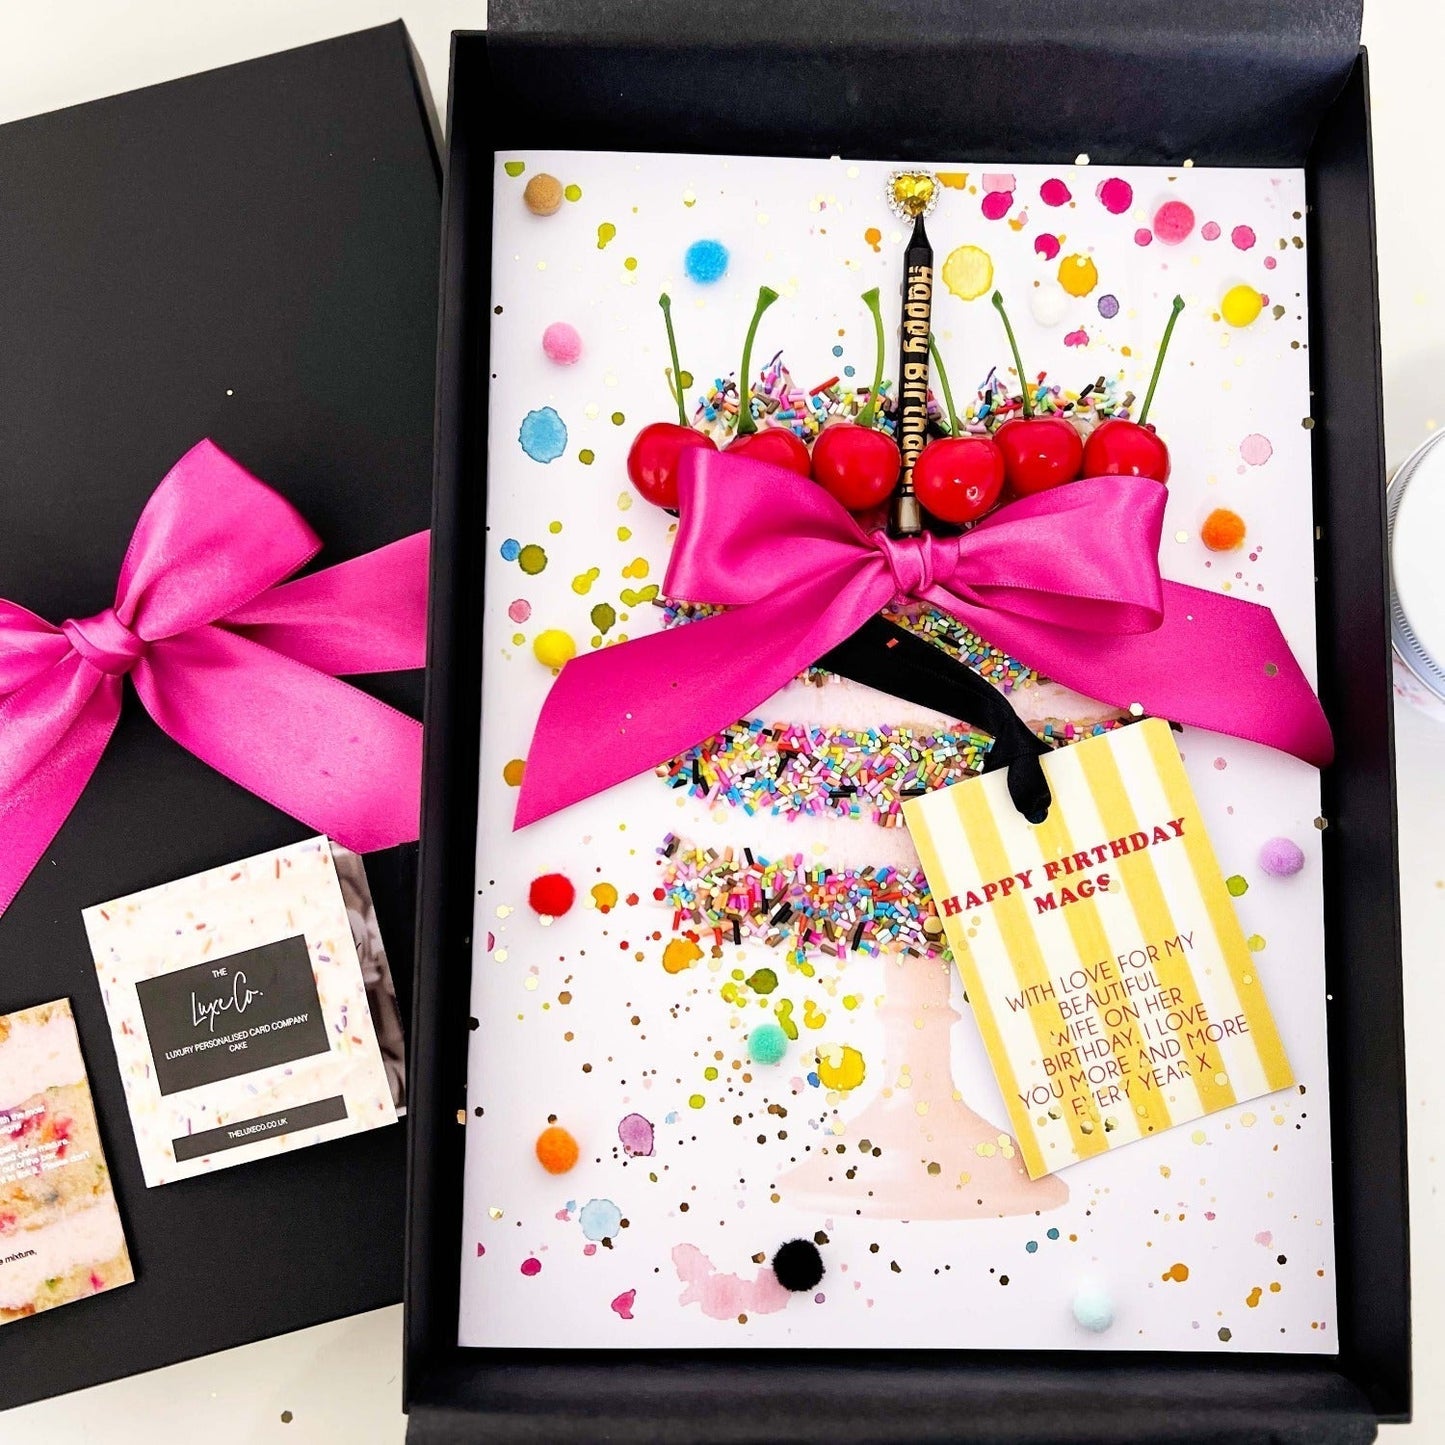 Luxury birthday card for best friends 18th birthday | Scented in birthday cake to look and smell like the real thing cards by The Luxe Co